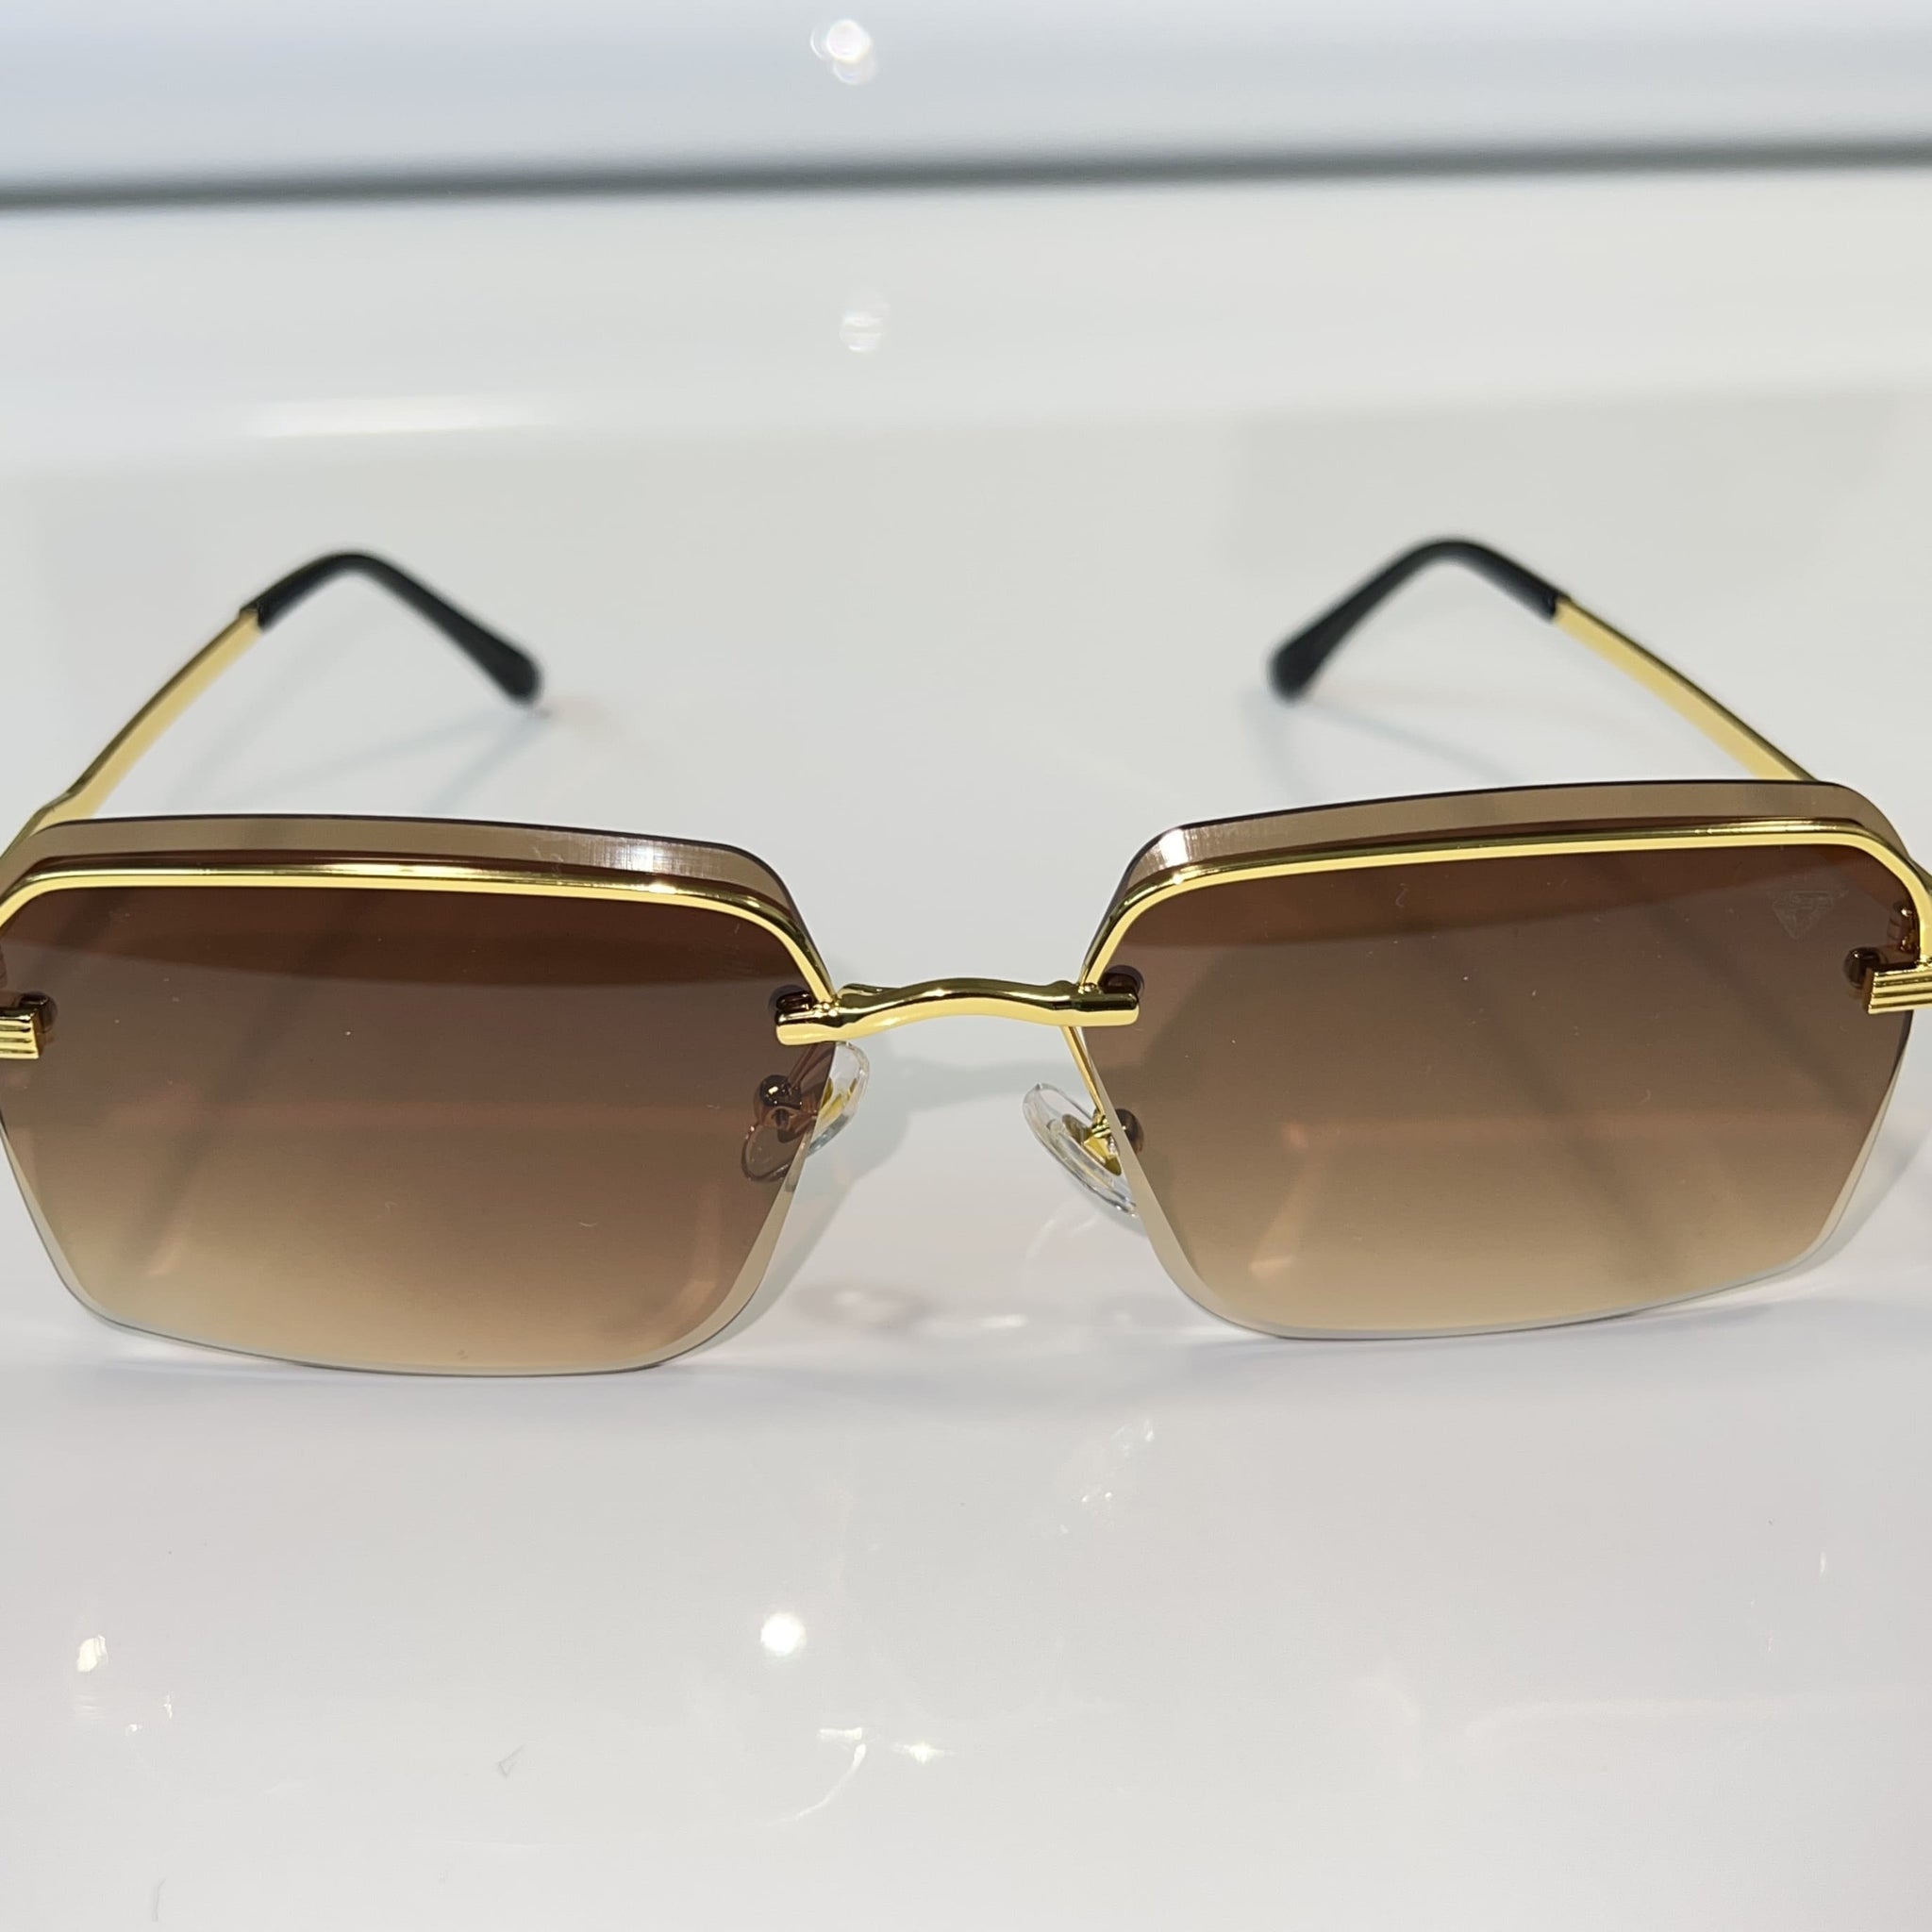 Invincible Glasses - 14k gold plated - Brown Shade - Sehgal Glasses